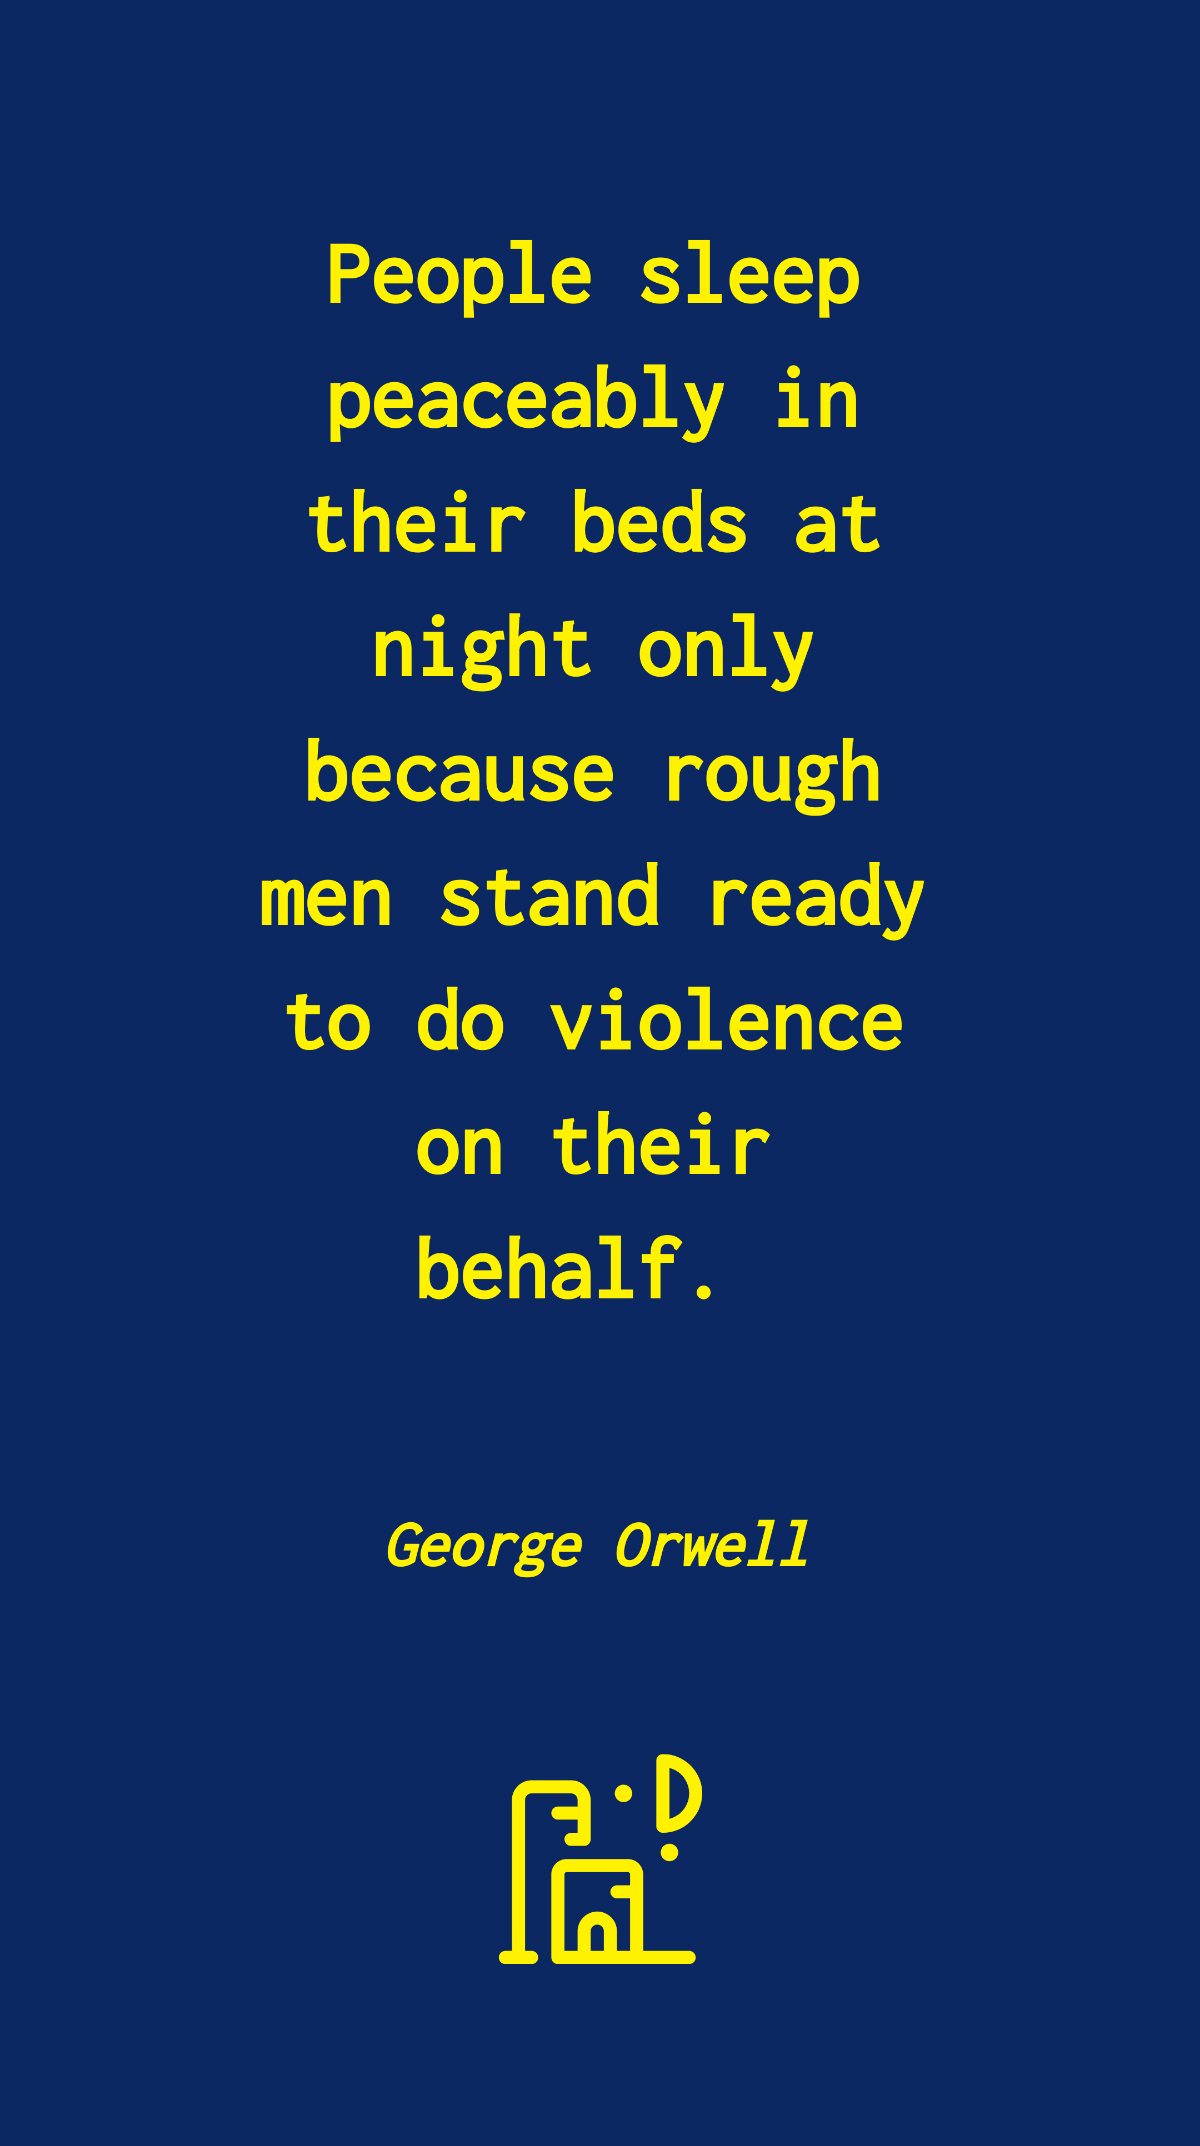 Free George Orwell - People sleep peaceably in their beds at night only because rough men stand ready to do violence on their behalf. Template